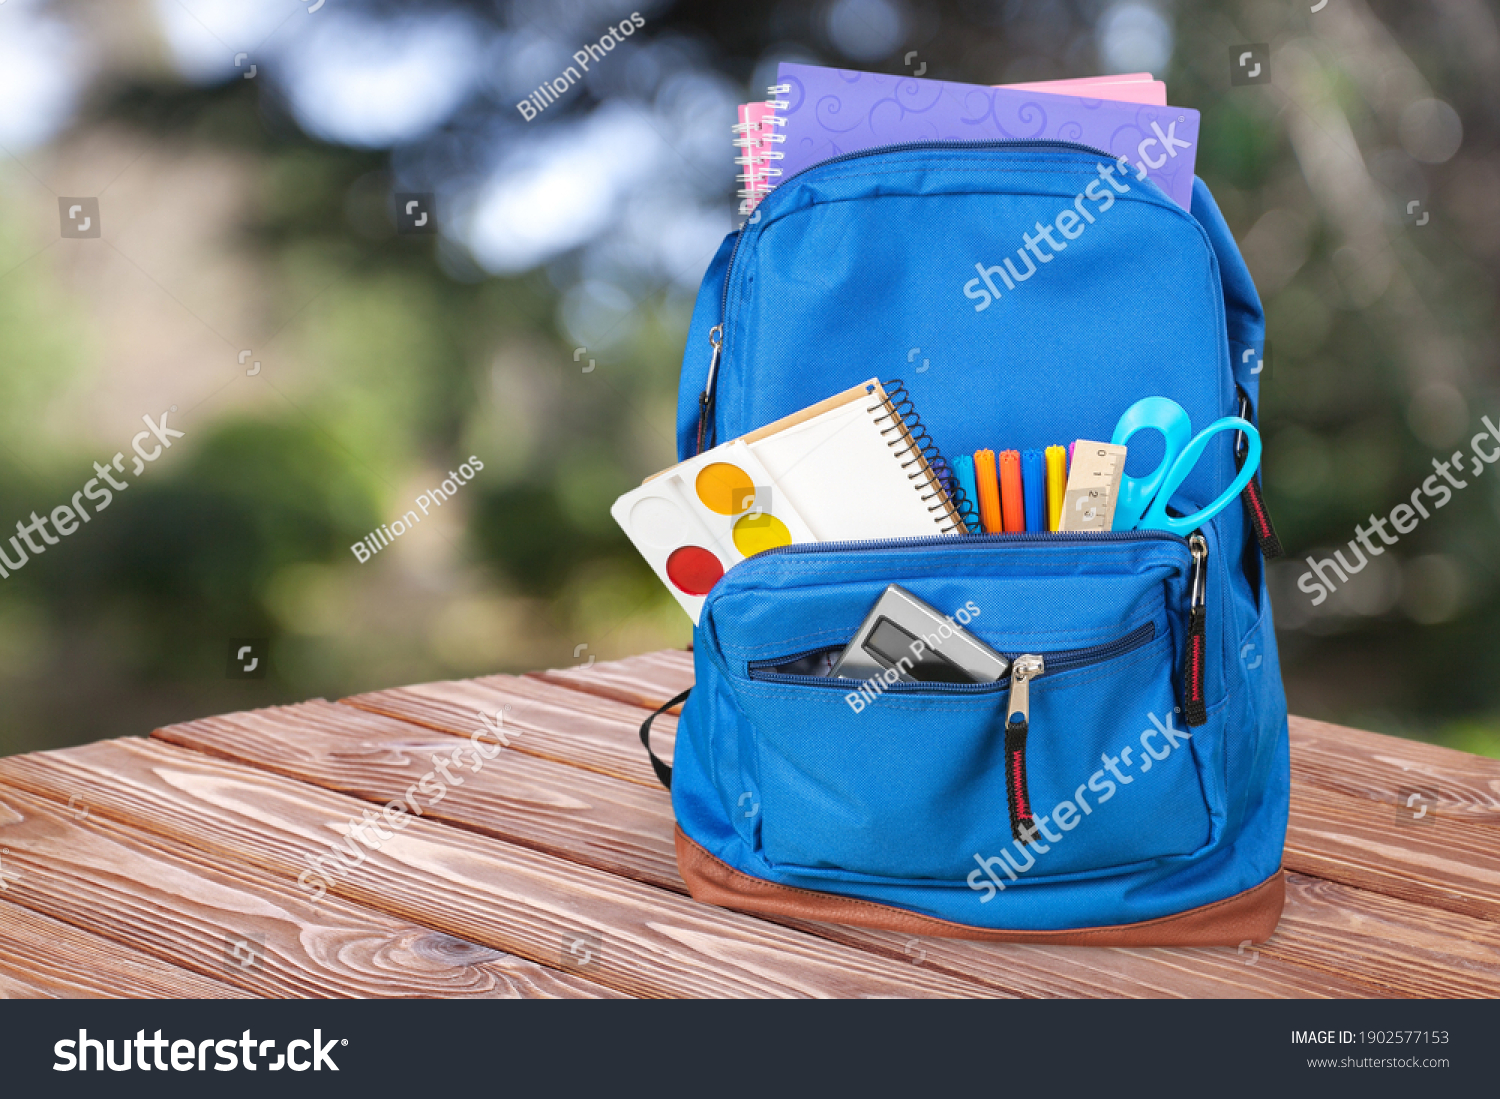 Classic school backpack with colorful school supplies and books on desk. #1902577153